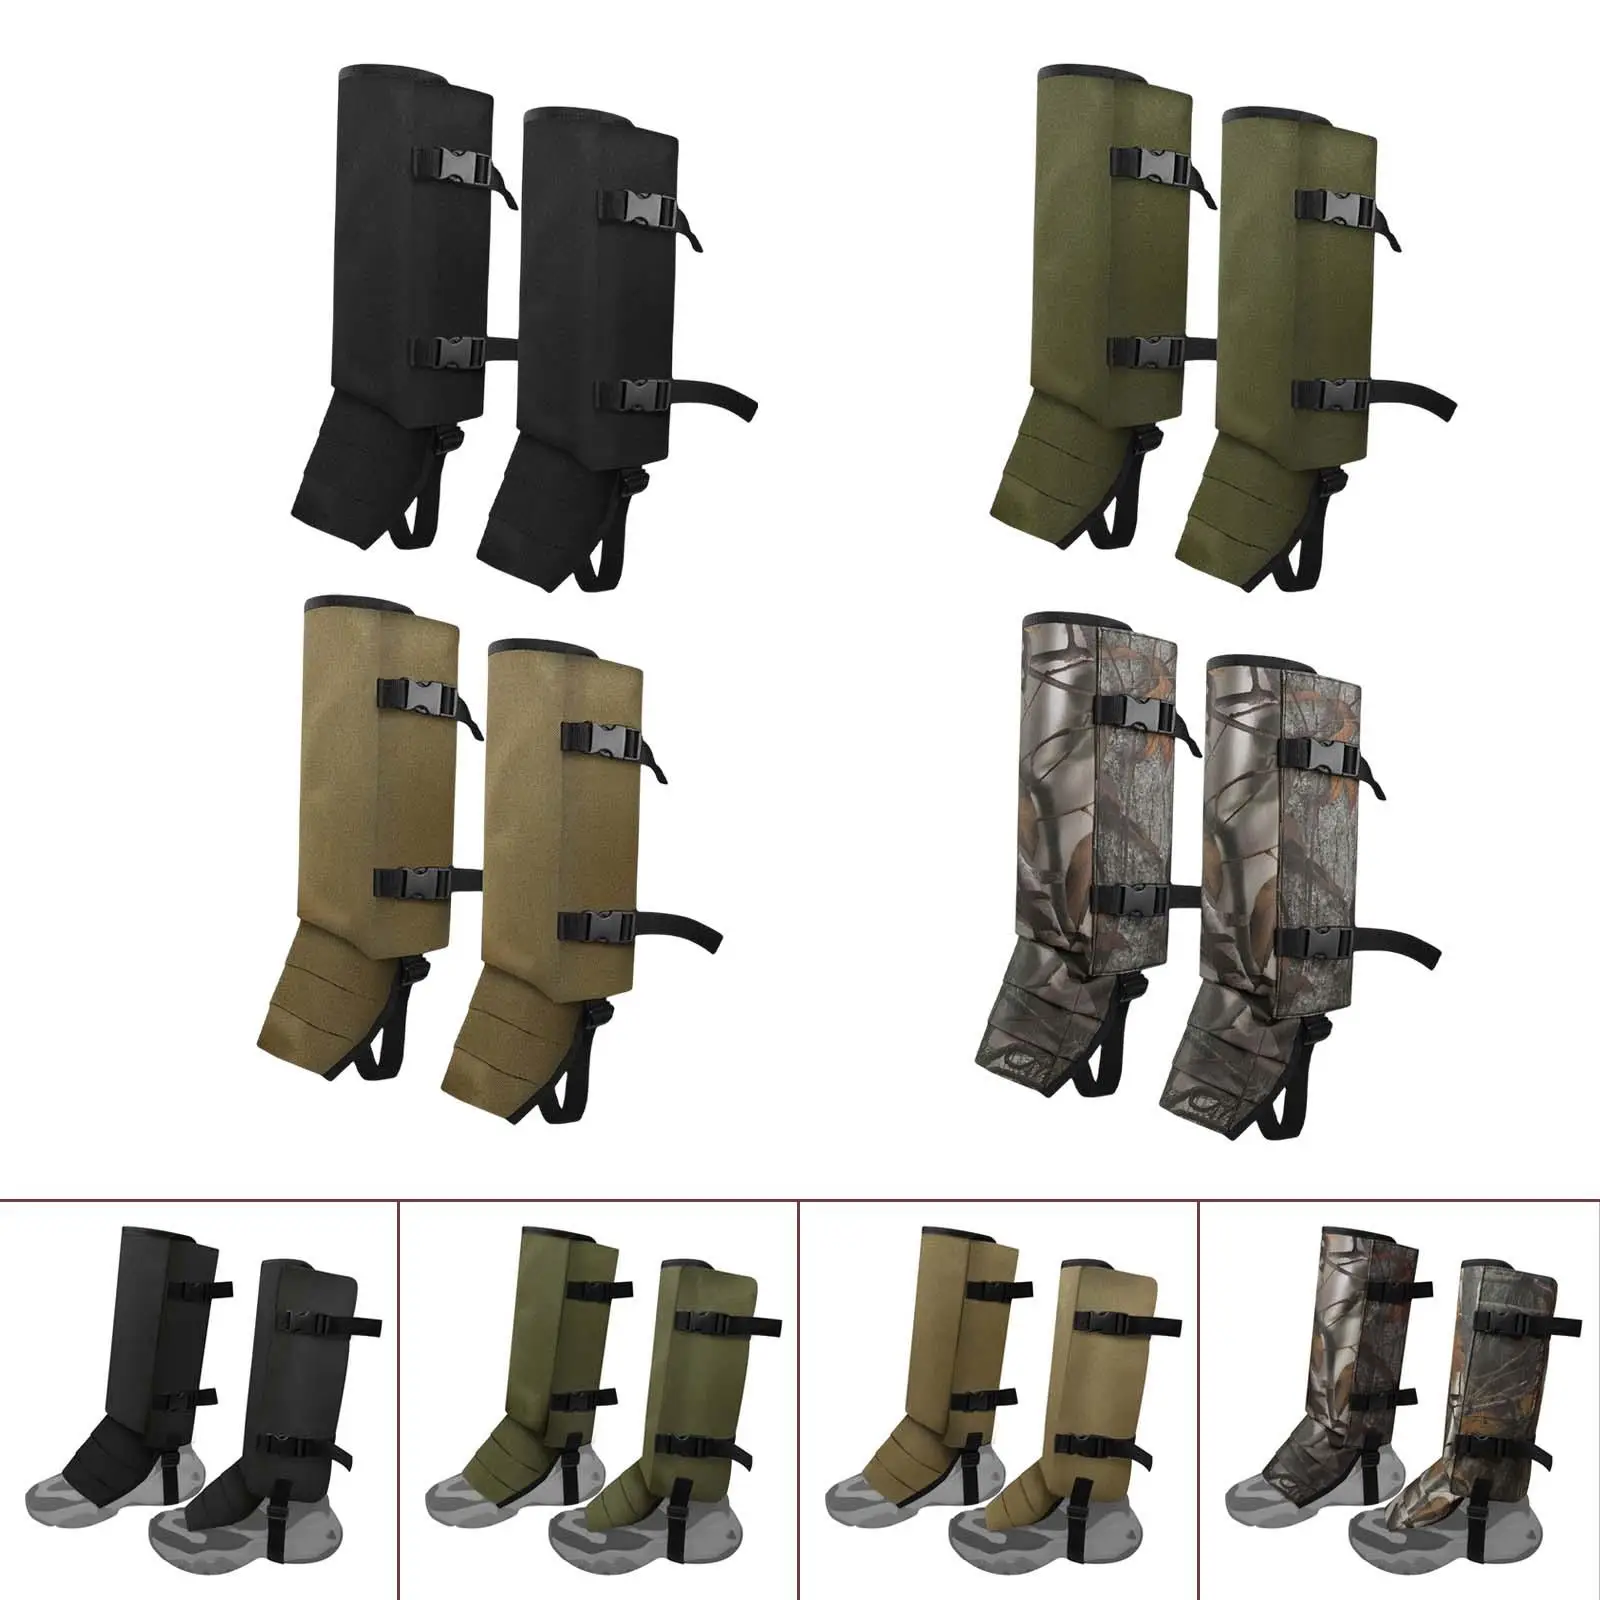 Lightweight Leg Gaiters Waterproof Snow Boot with Adjustable Size Shoes Covers for Camping Travel Hunting Climbing Walking